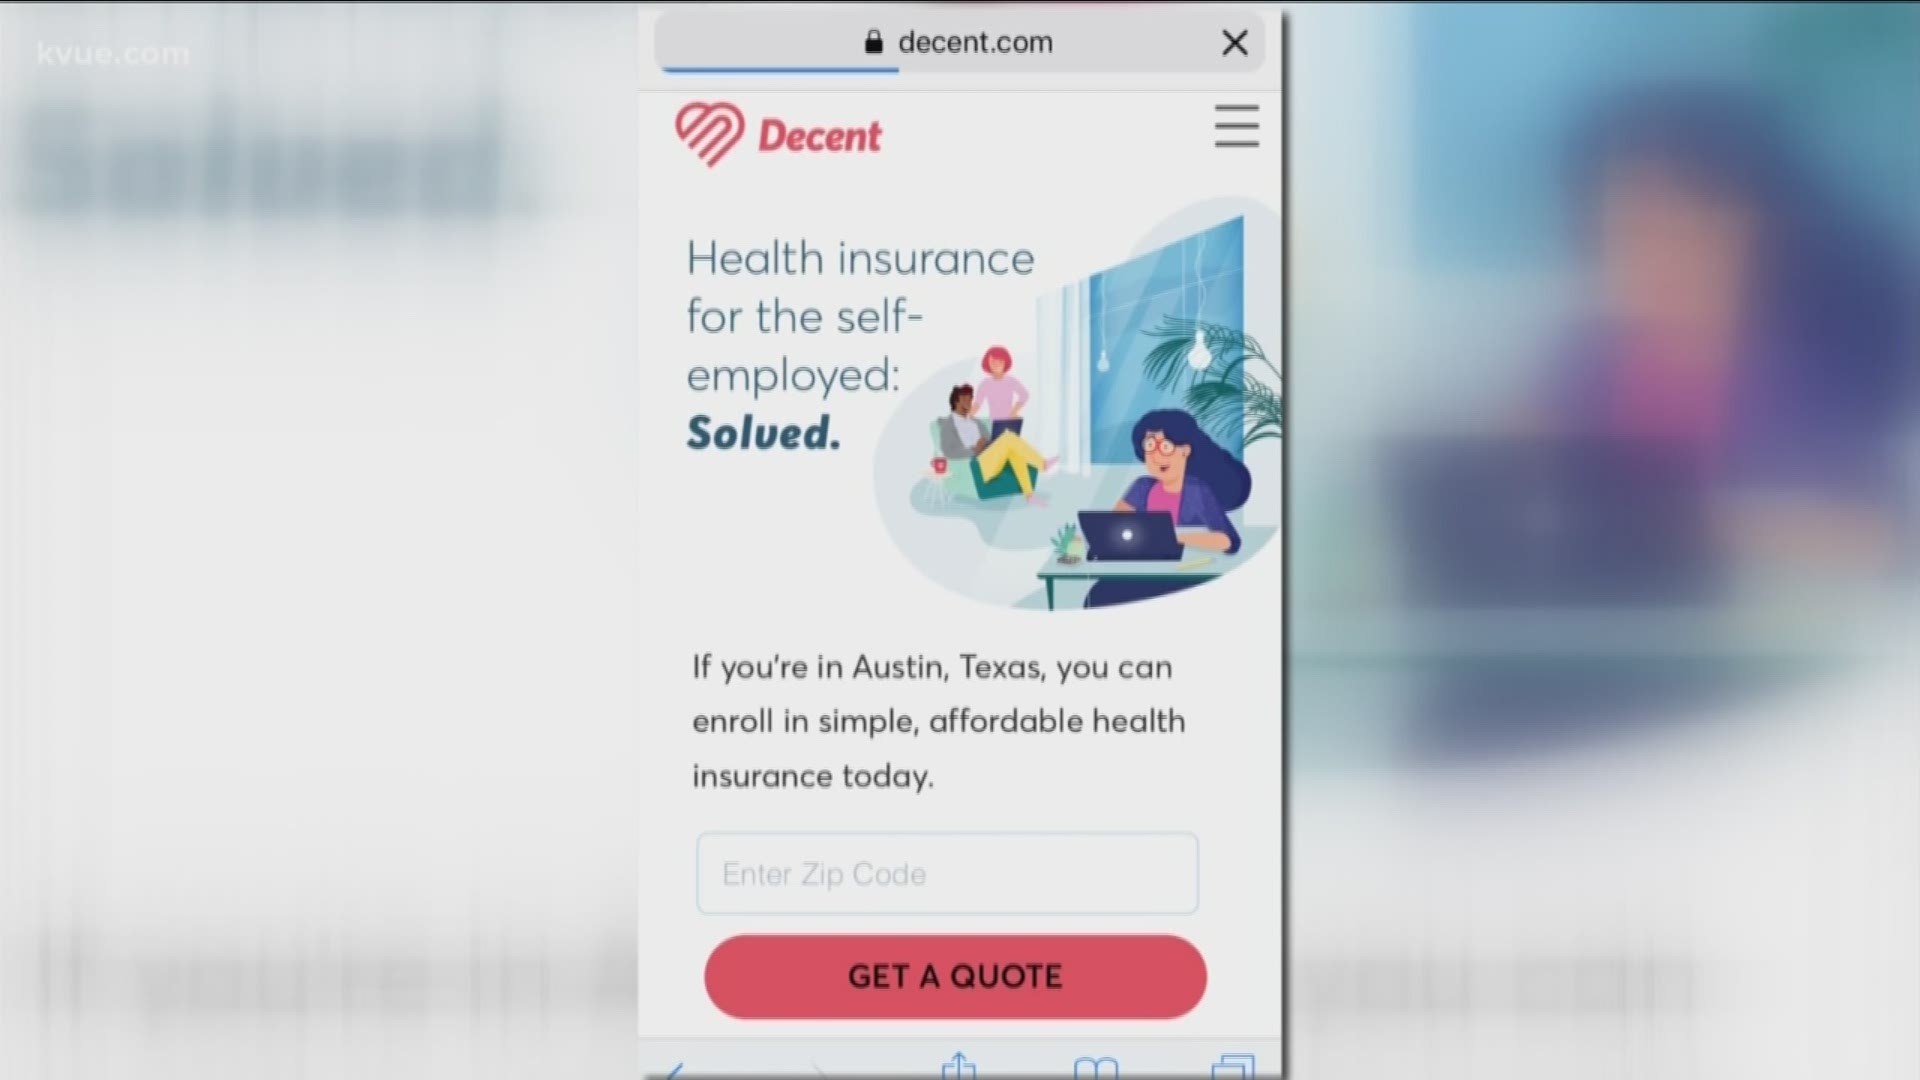 Finding affordable health care can be challenging – and that's especially true for freelancers. That's why Decent is hoping they can help.